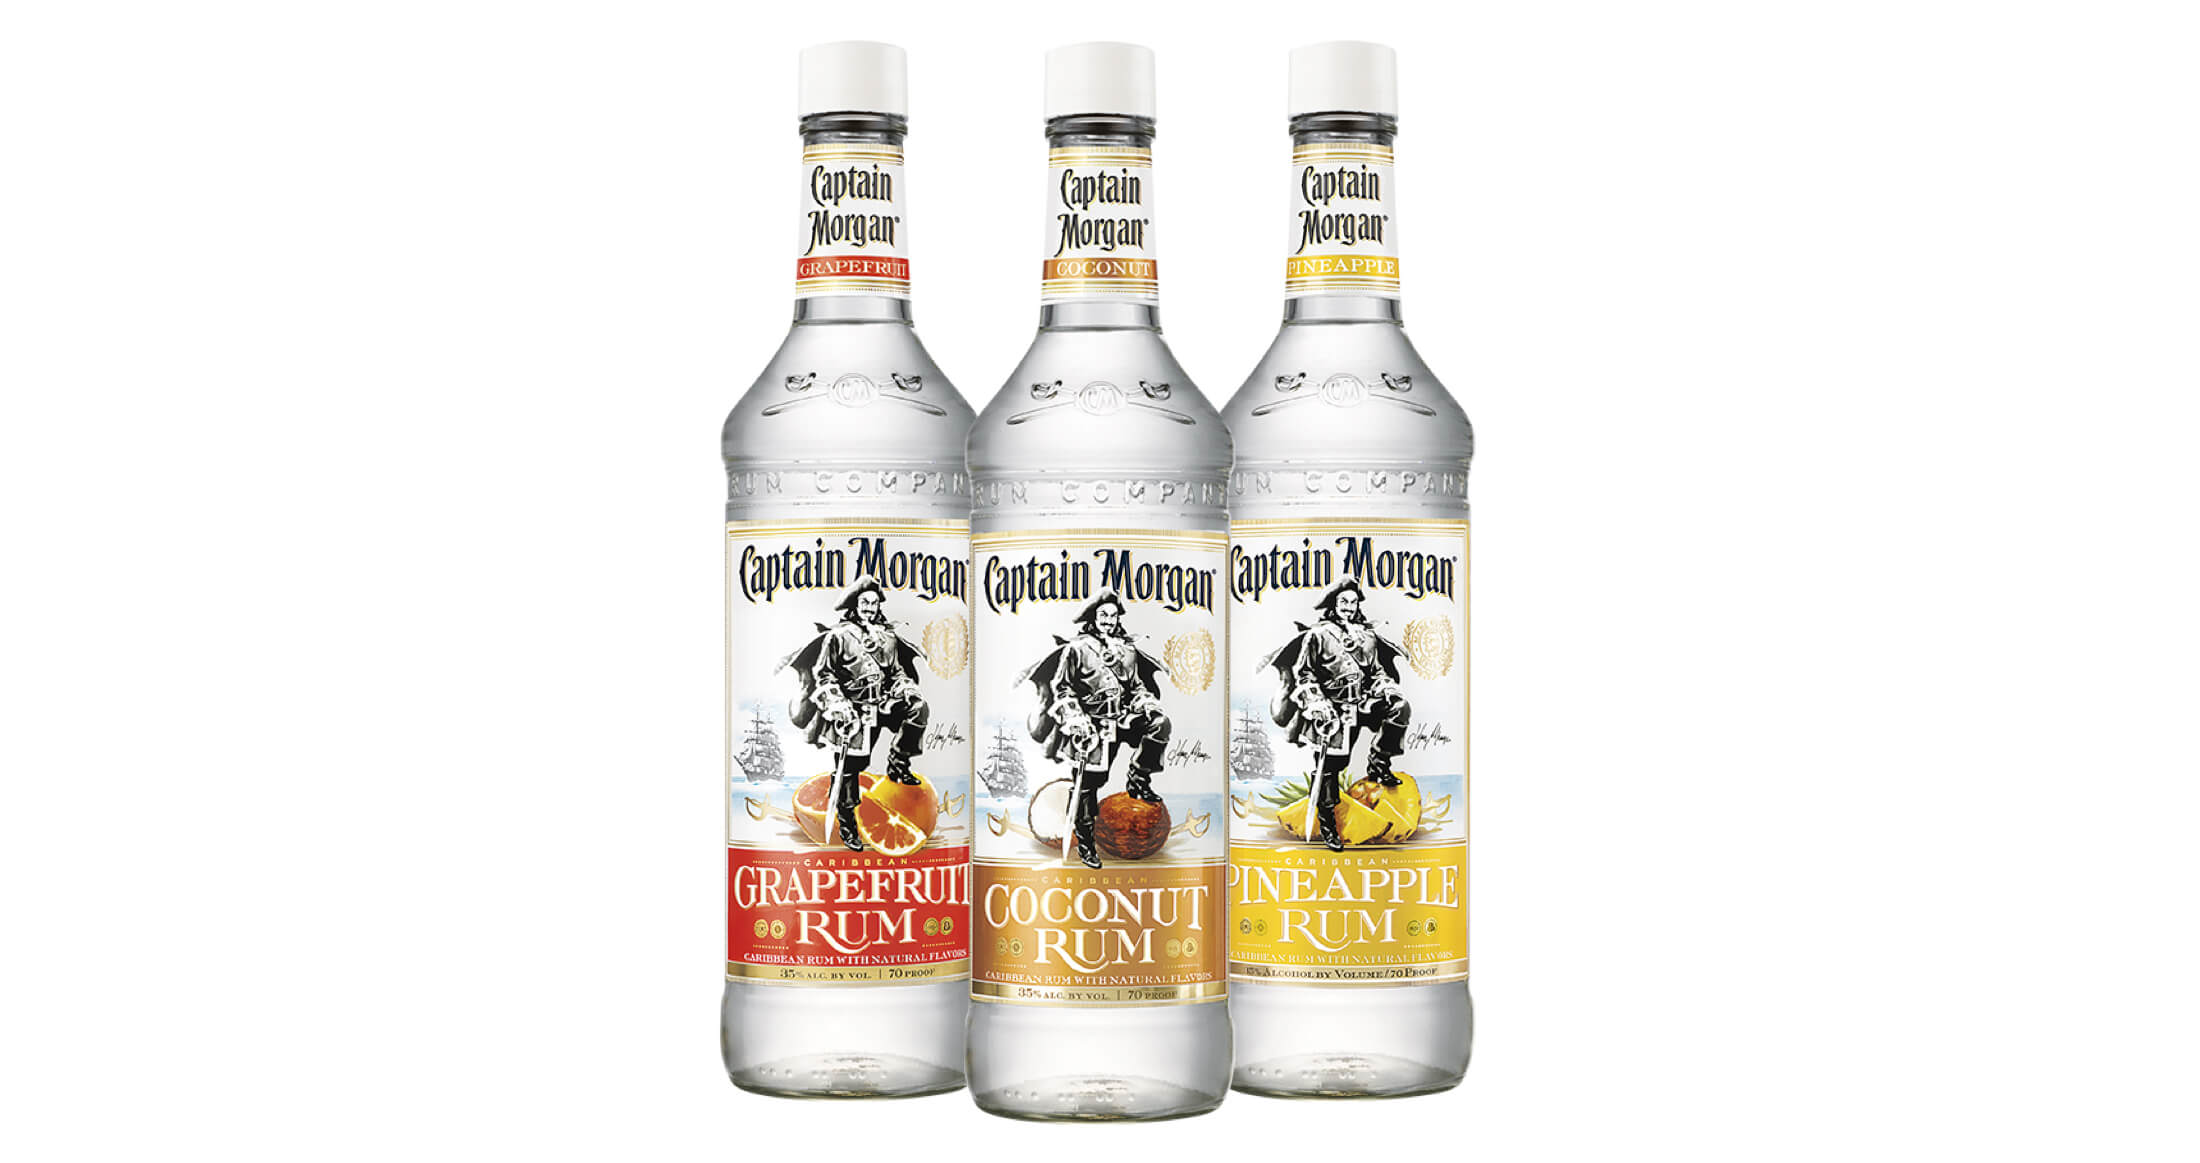 Captain Morgan Launches New Flavored White Rums